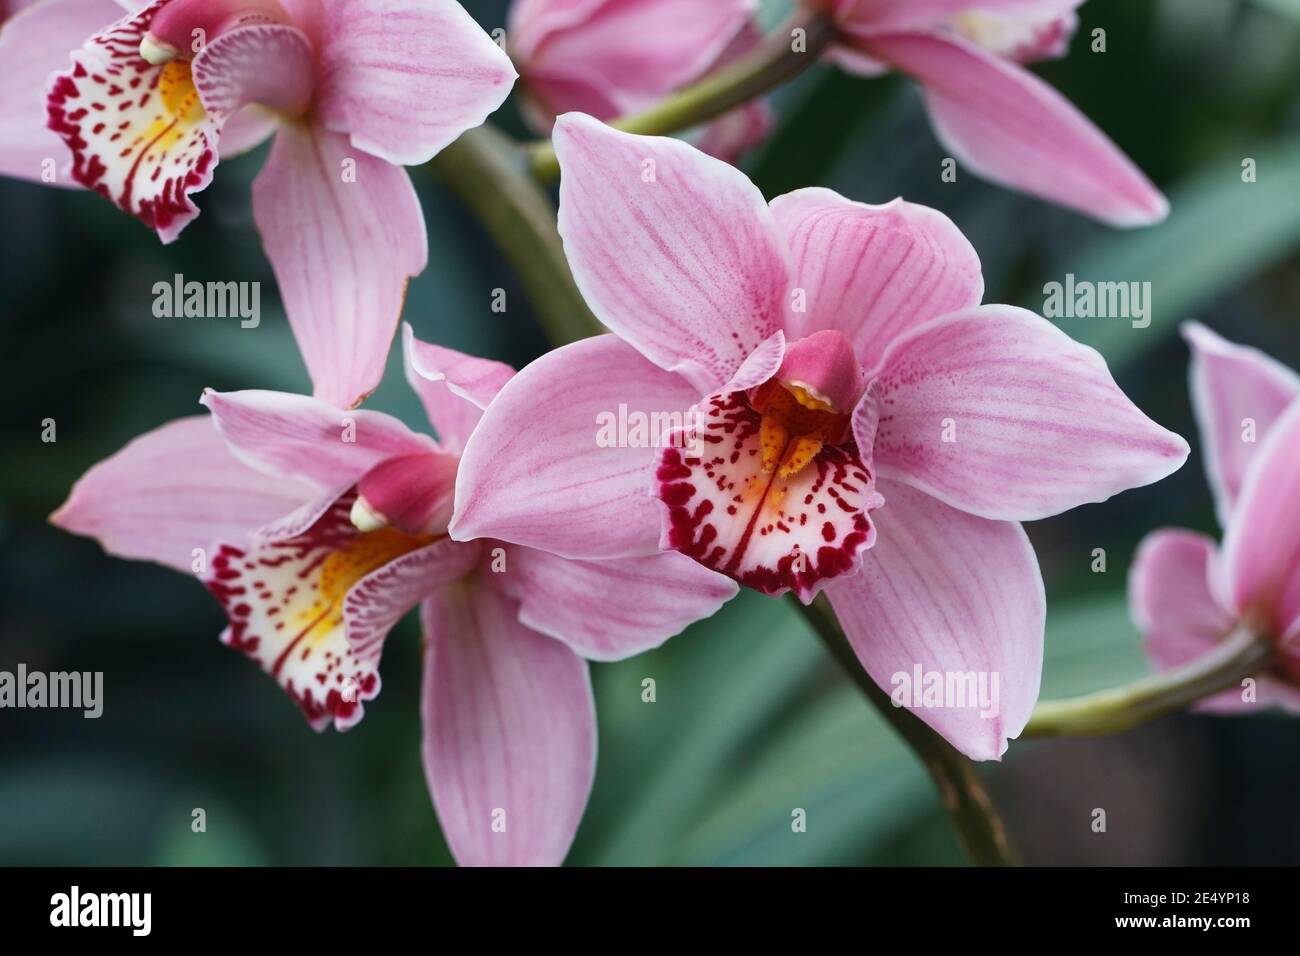 Cymbidium Rosanette gx. Close up of an Orchid flower. Stock Photo